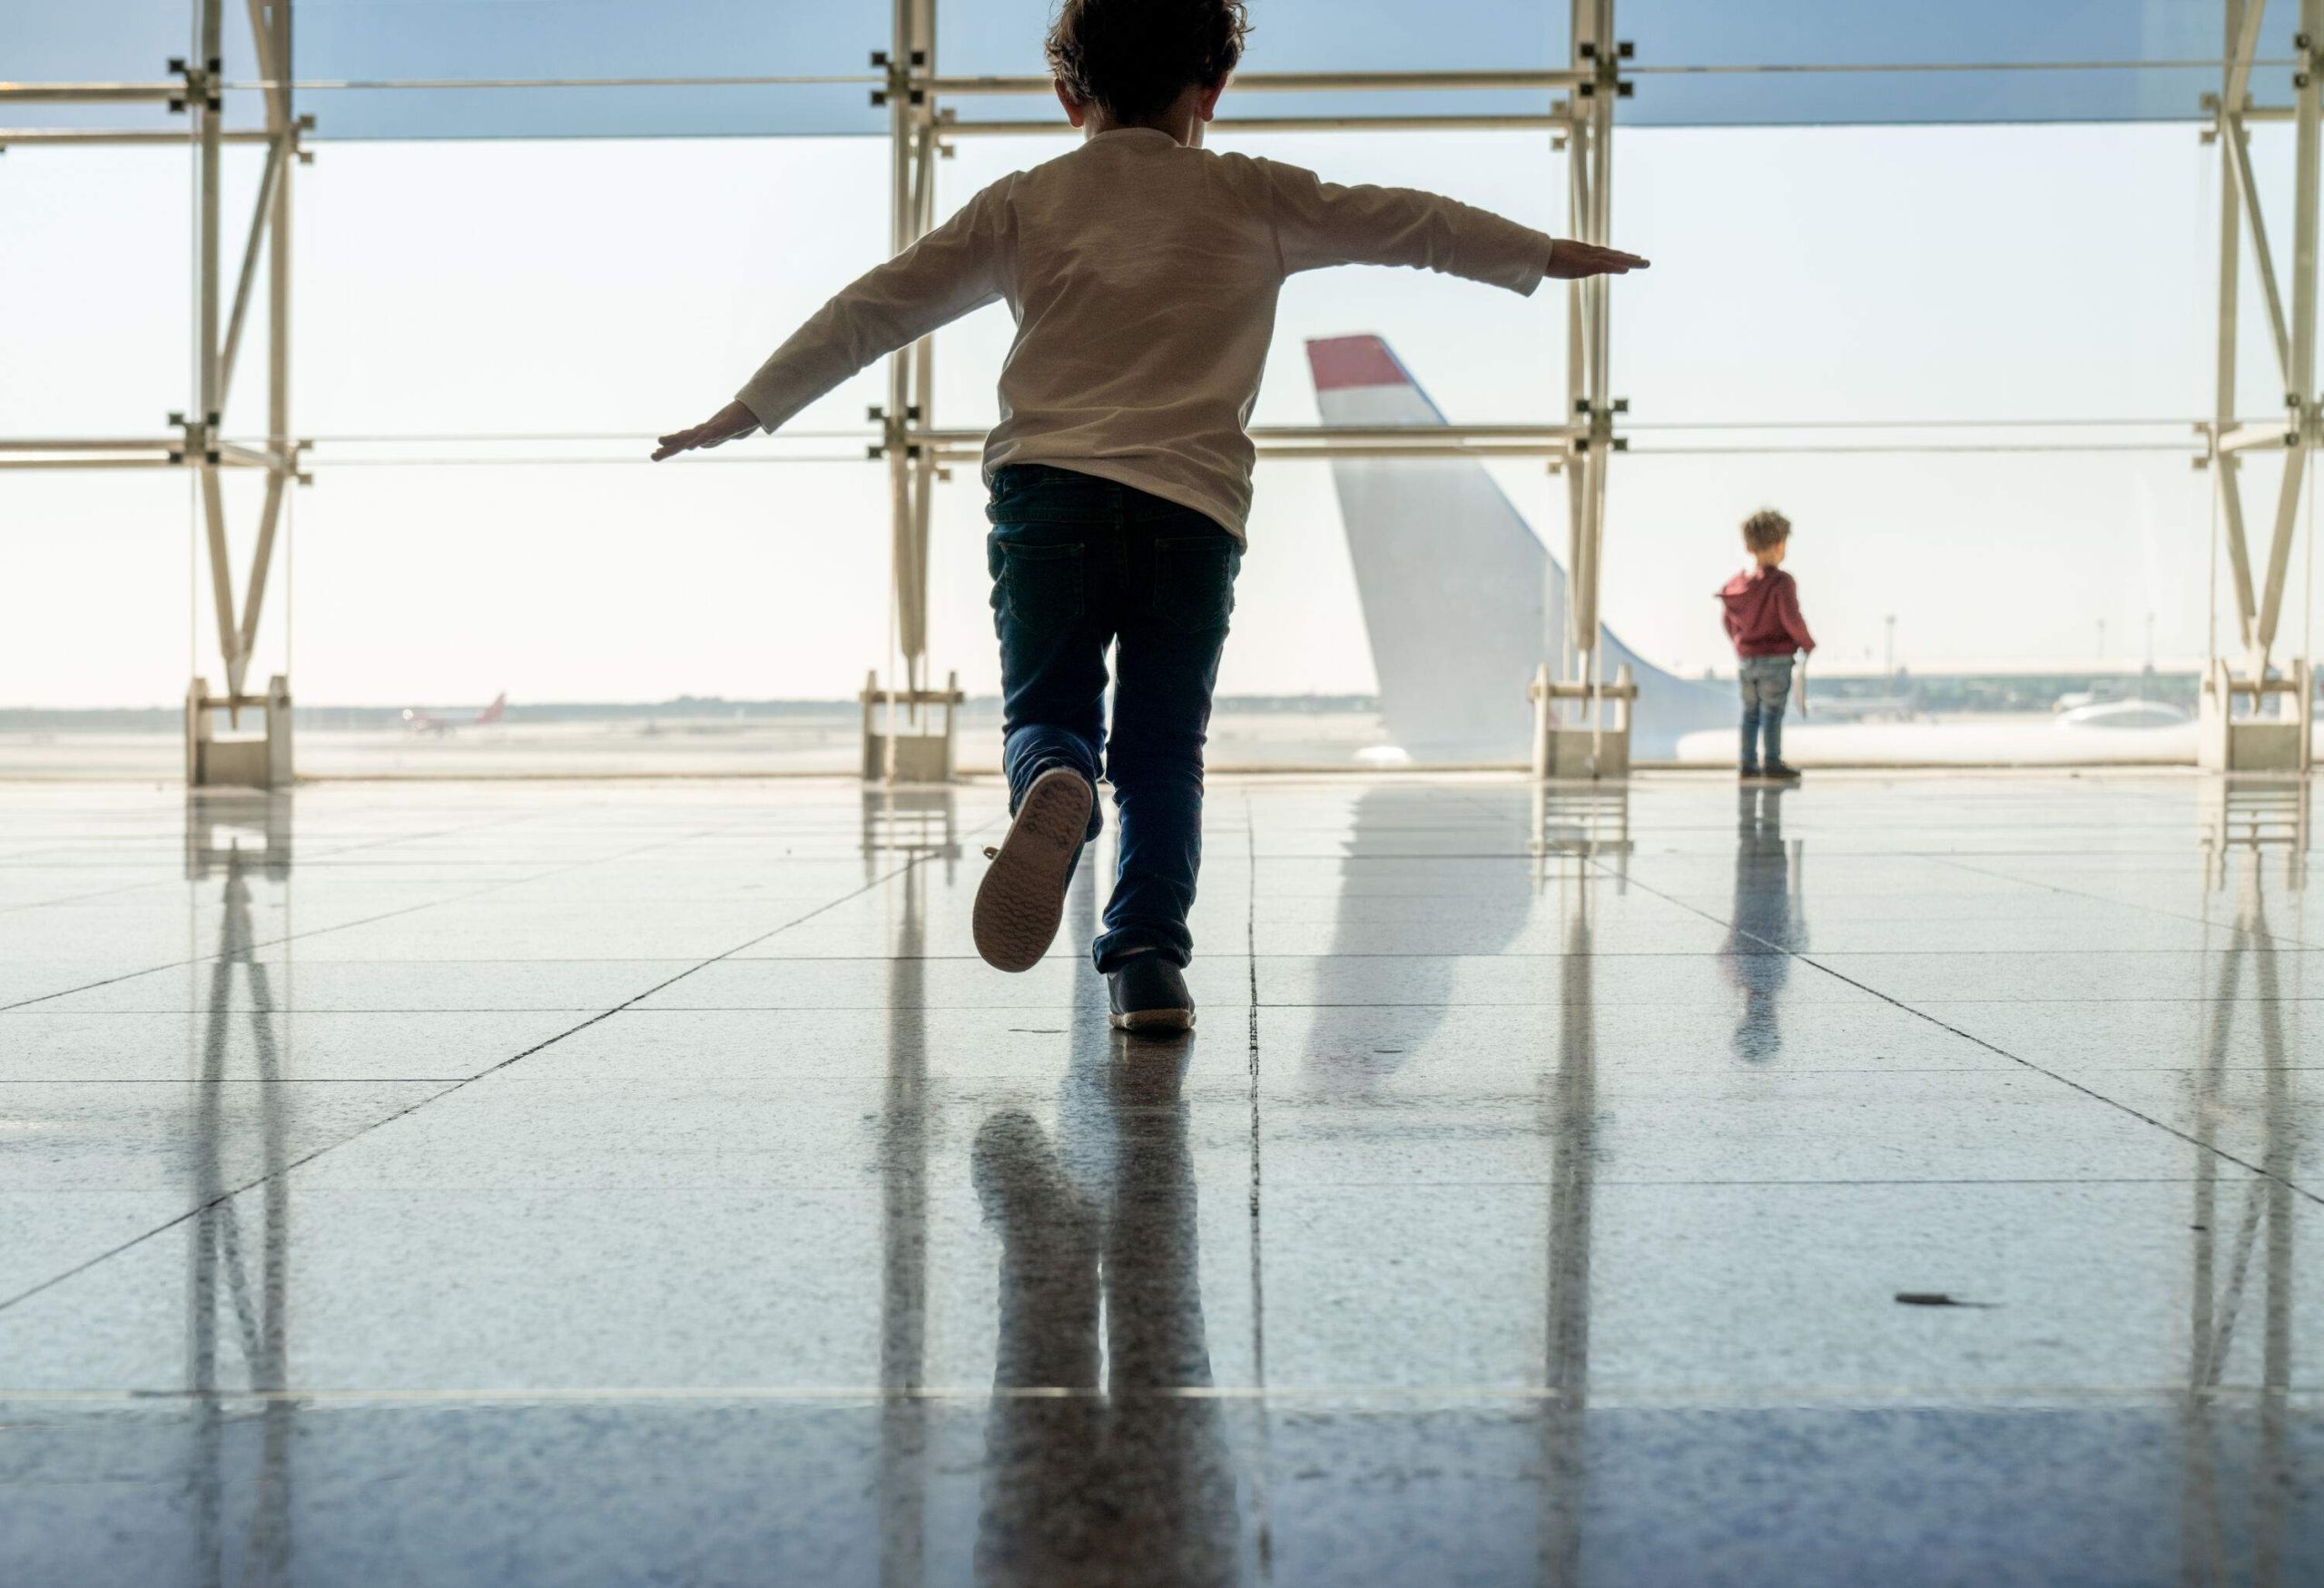 A boy balancing on one foot and another on the glass window looking at the airplane in the airport.